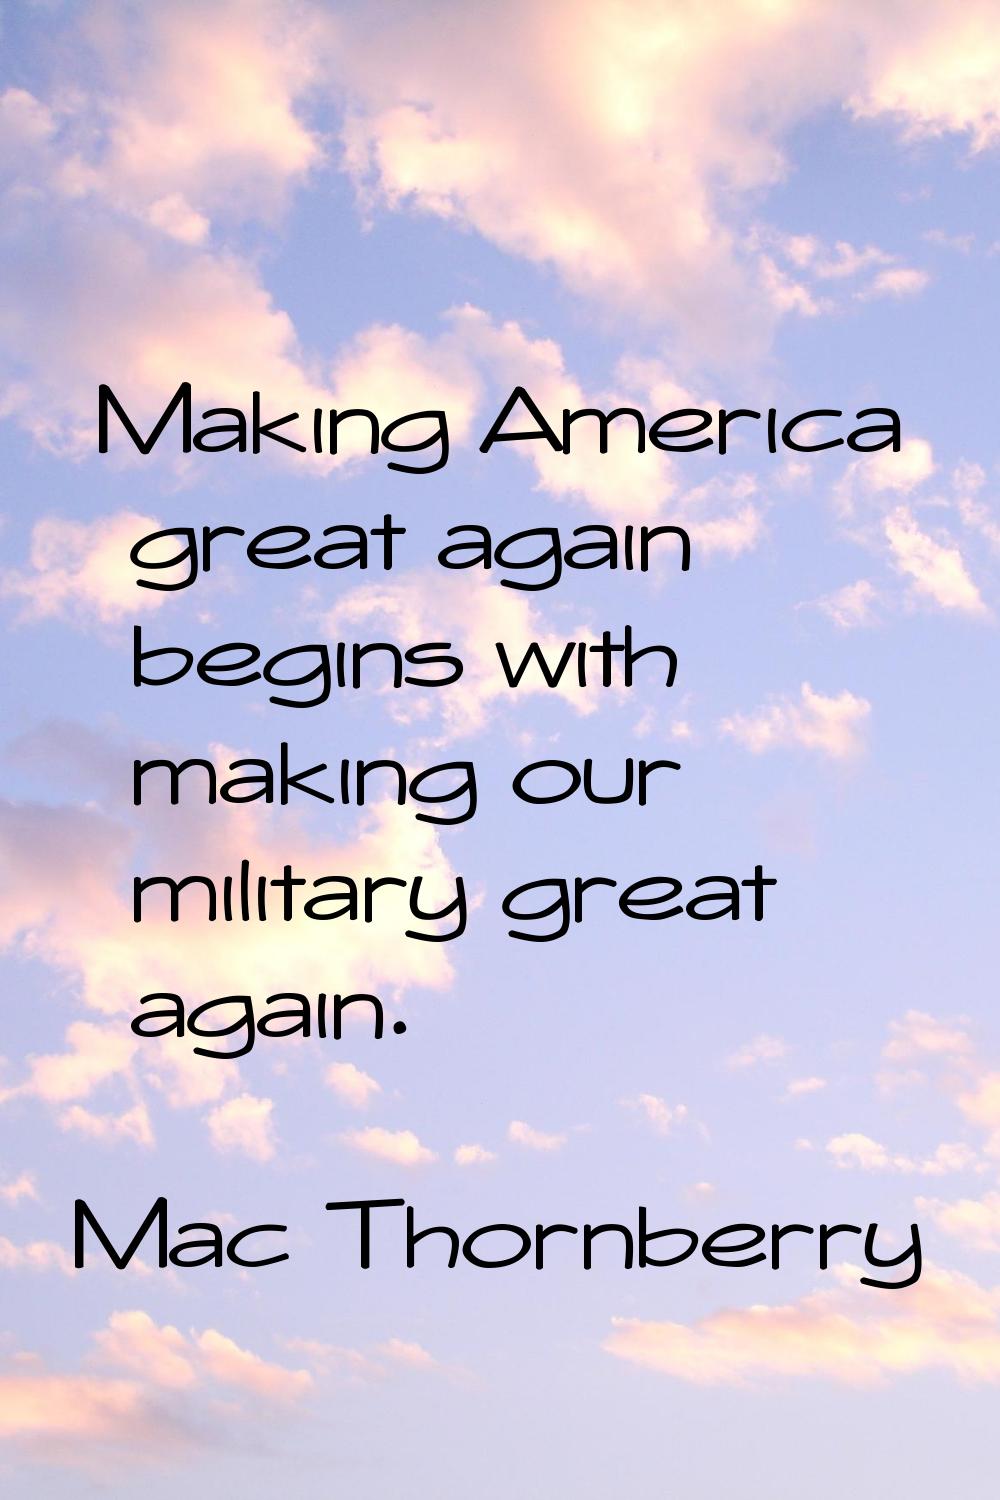 Making America great again begins with making our military great again.